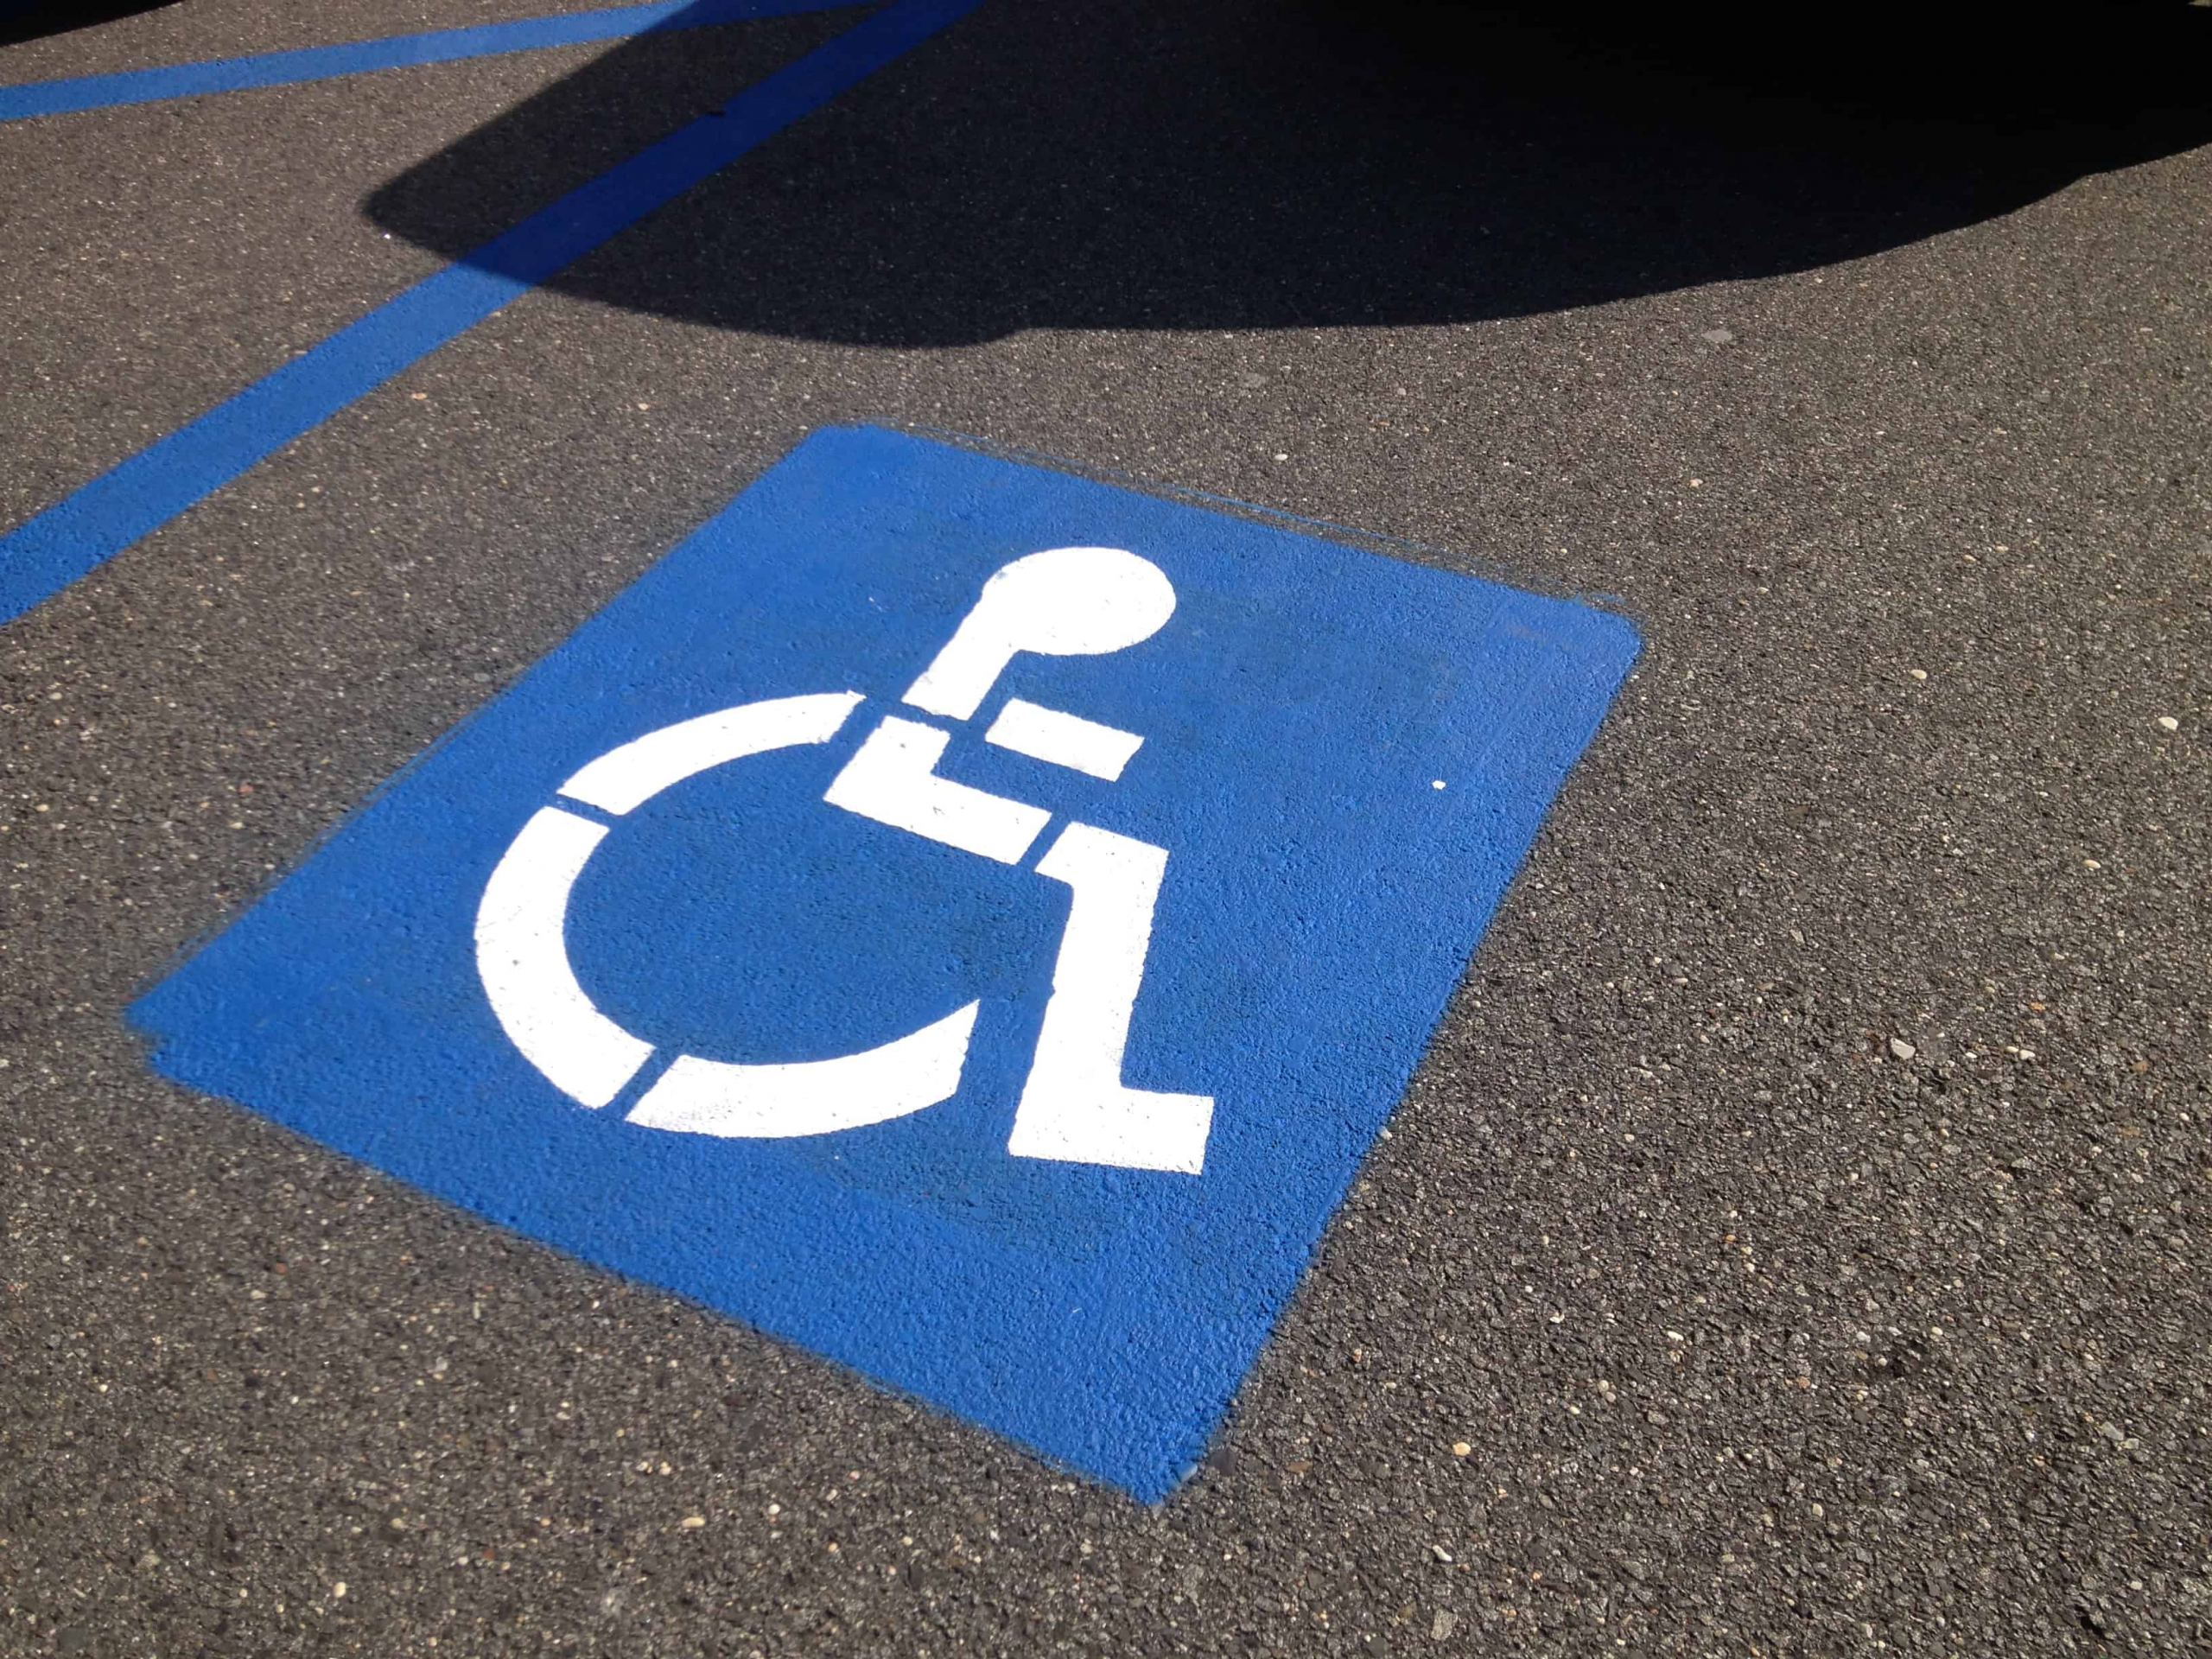 Accessible parking sign. SmartSign/CC Flickr